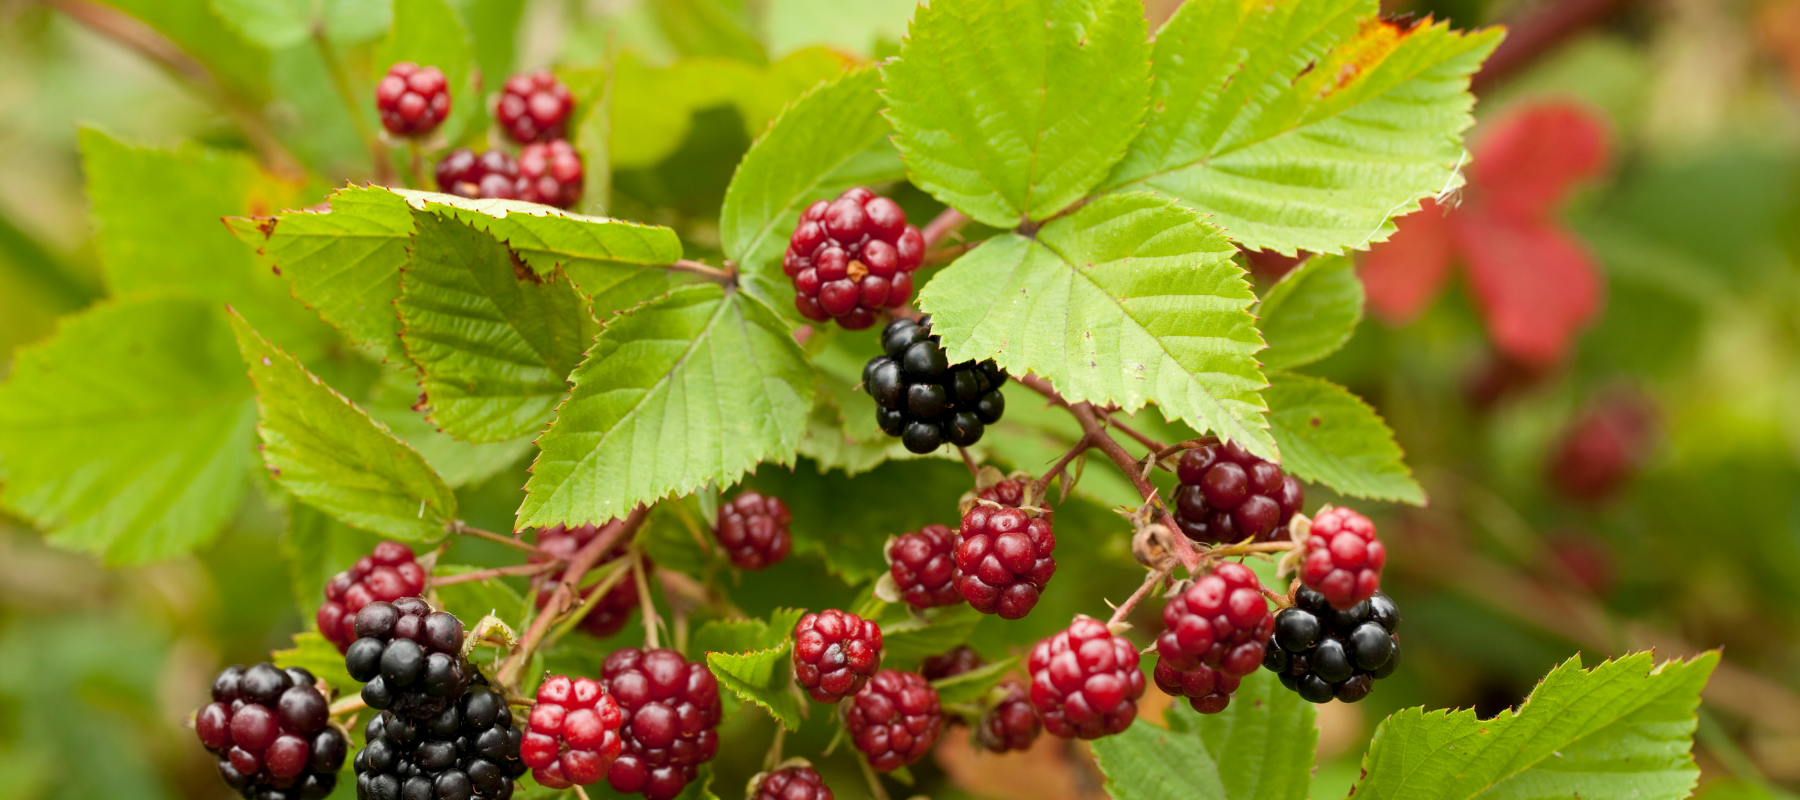 Grow your own Berries